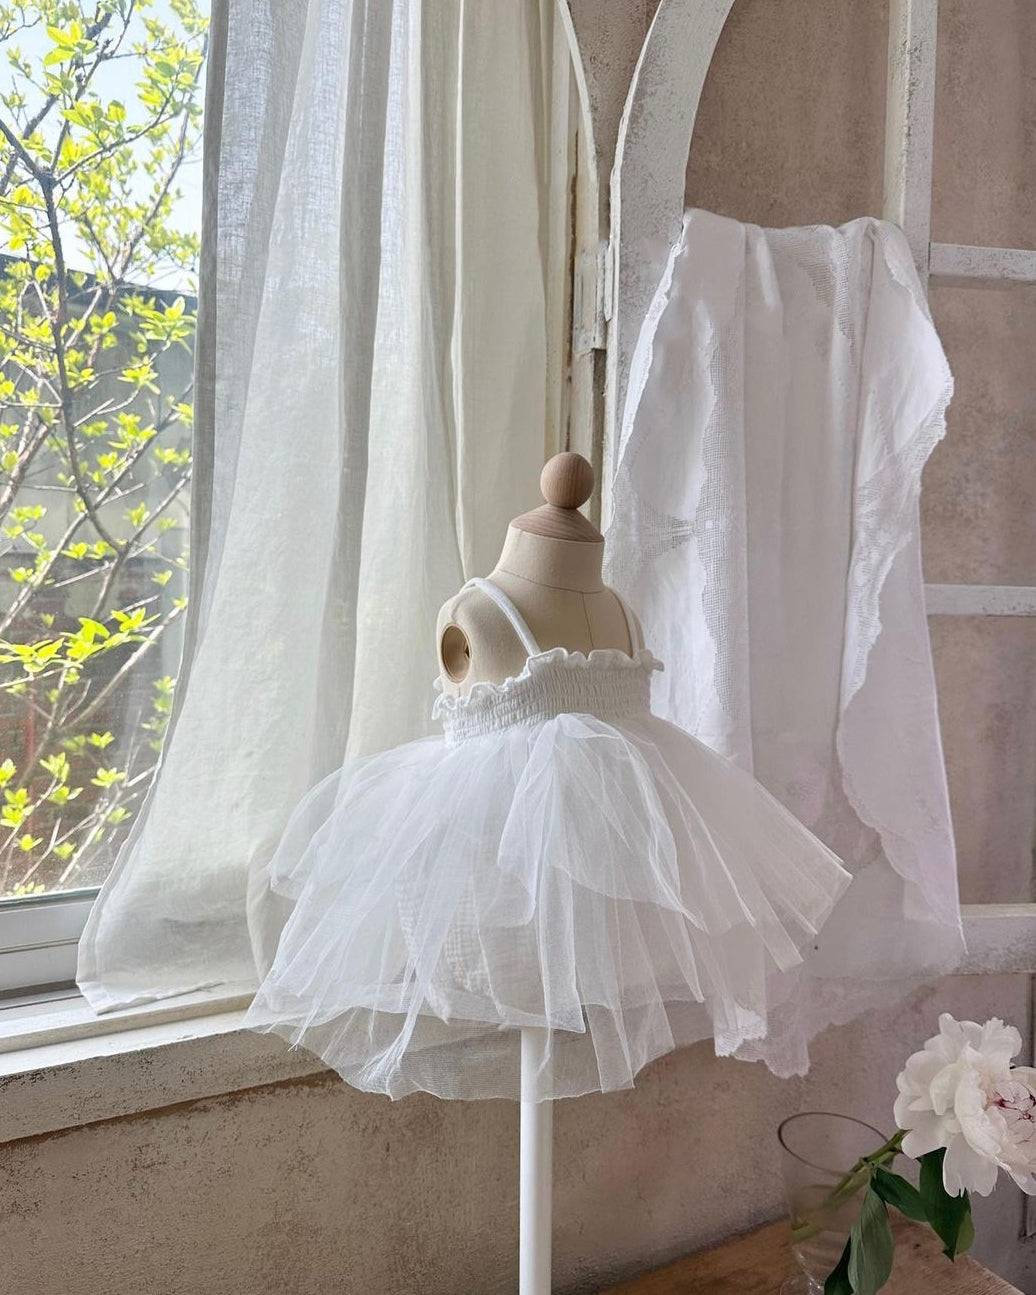 Baby Monbebe Smocked Bodice Tutu Dress with Snap Closure (3-24m) - 3 Colors - AT NOON STORE